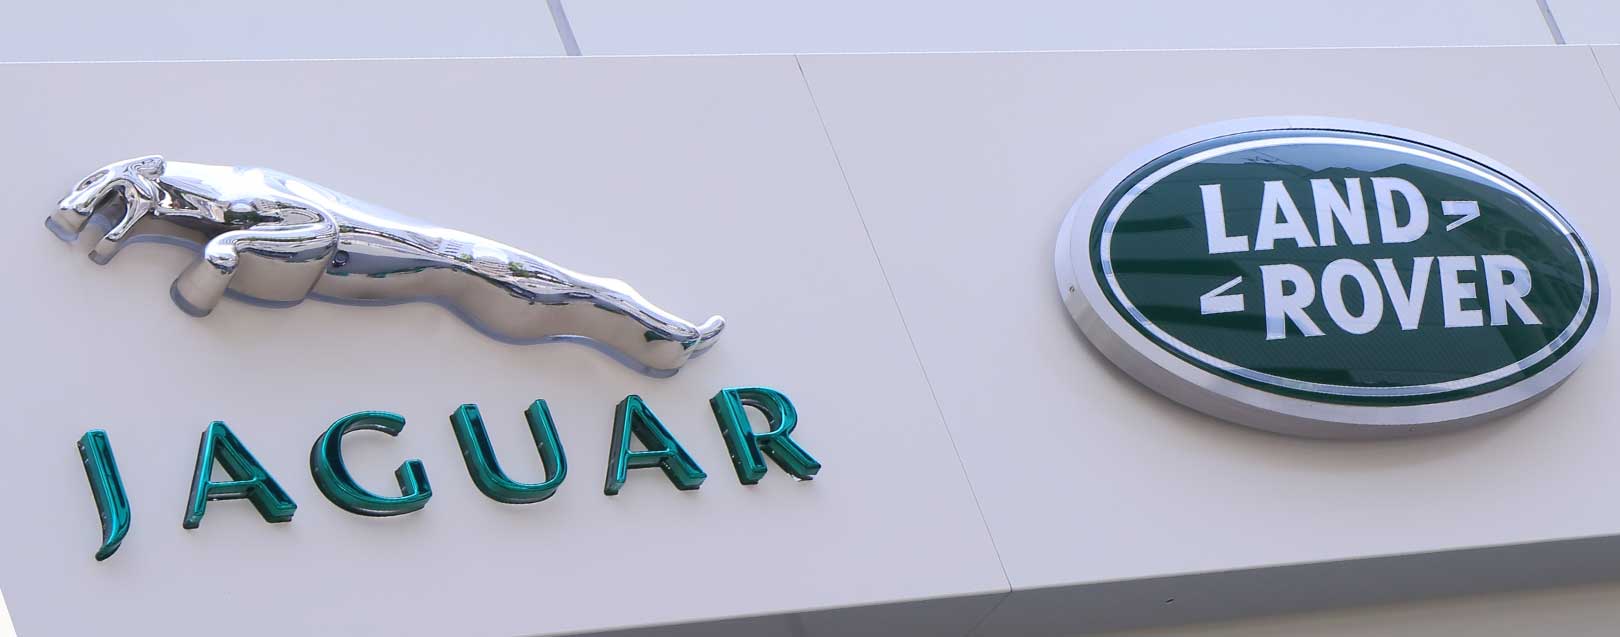 Tata-owned Jaguar Land Rover to hire 5000 people in Britain